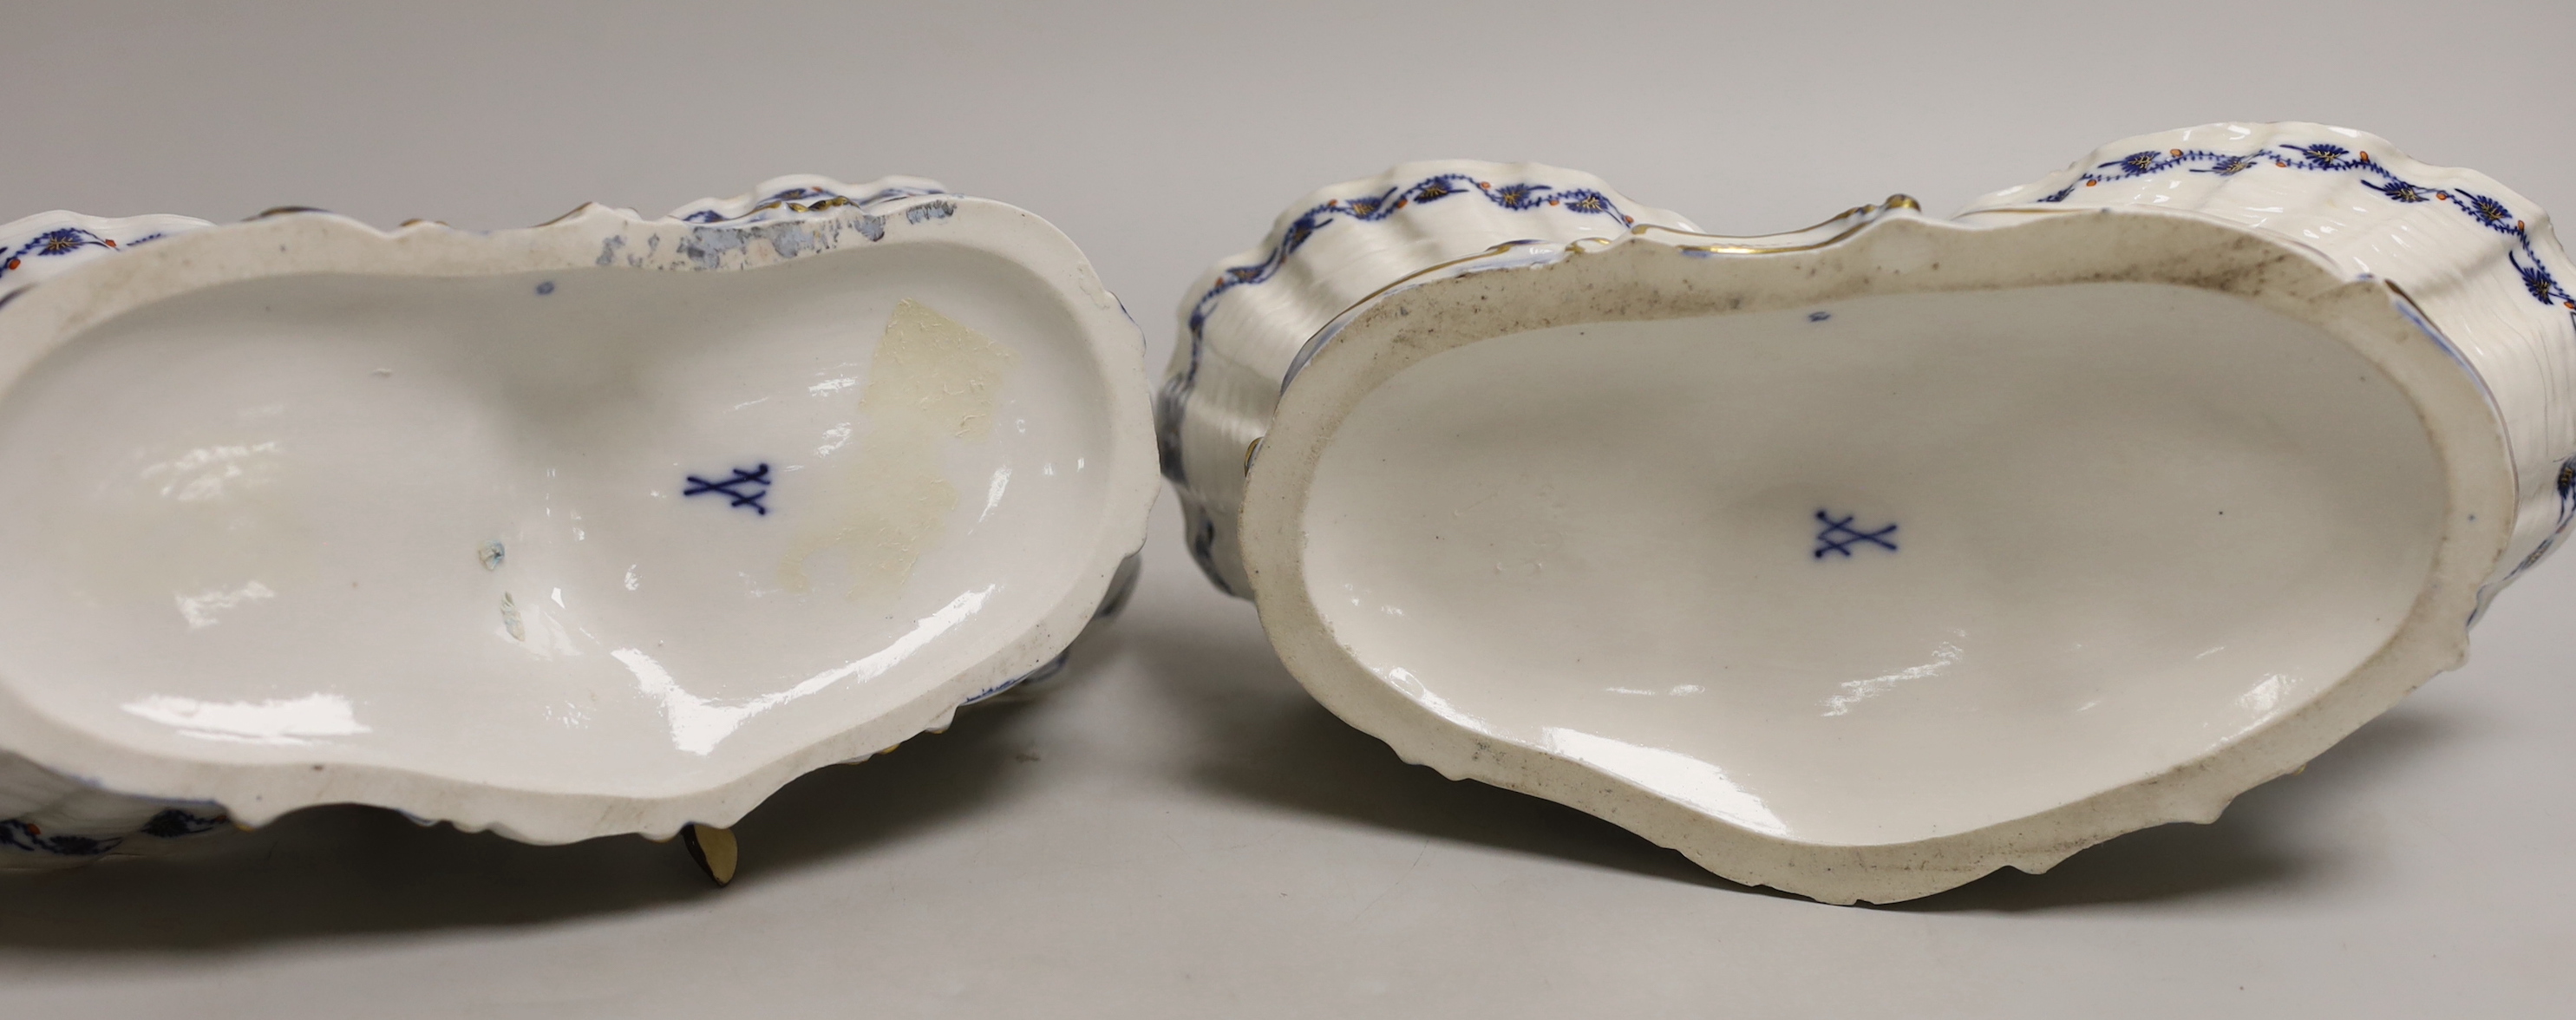 A pair of late 19th century Meissen figural sweetmeat dishes, 24.5cm wide